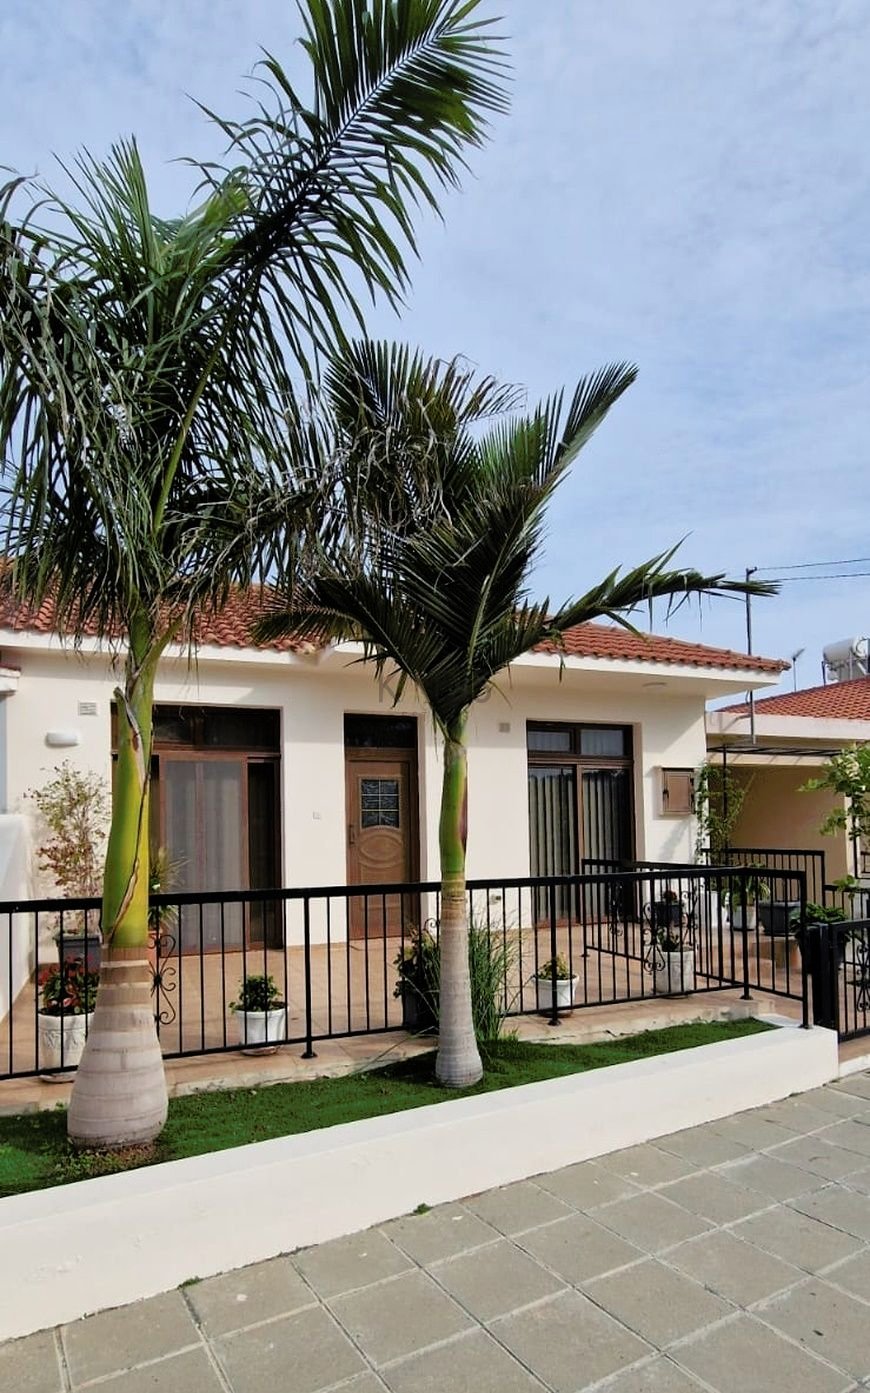 3 Bedroom House for Sale in Mazotos, Larnaca District